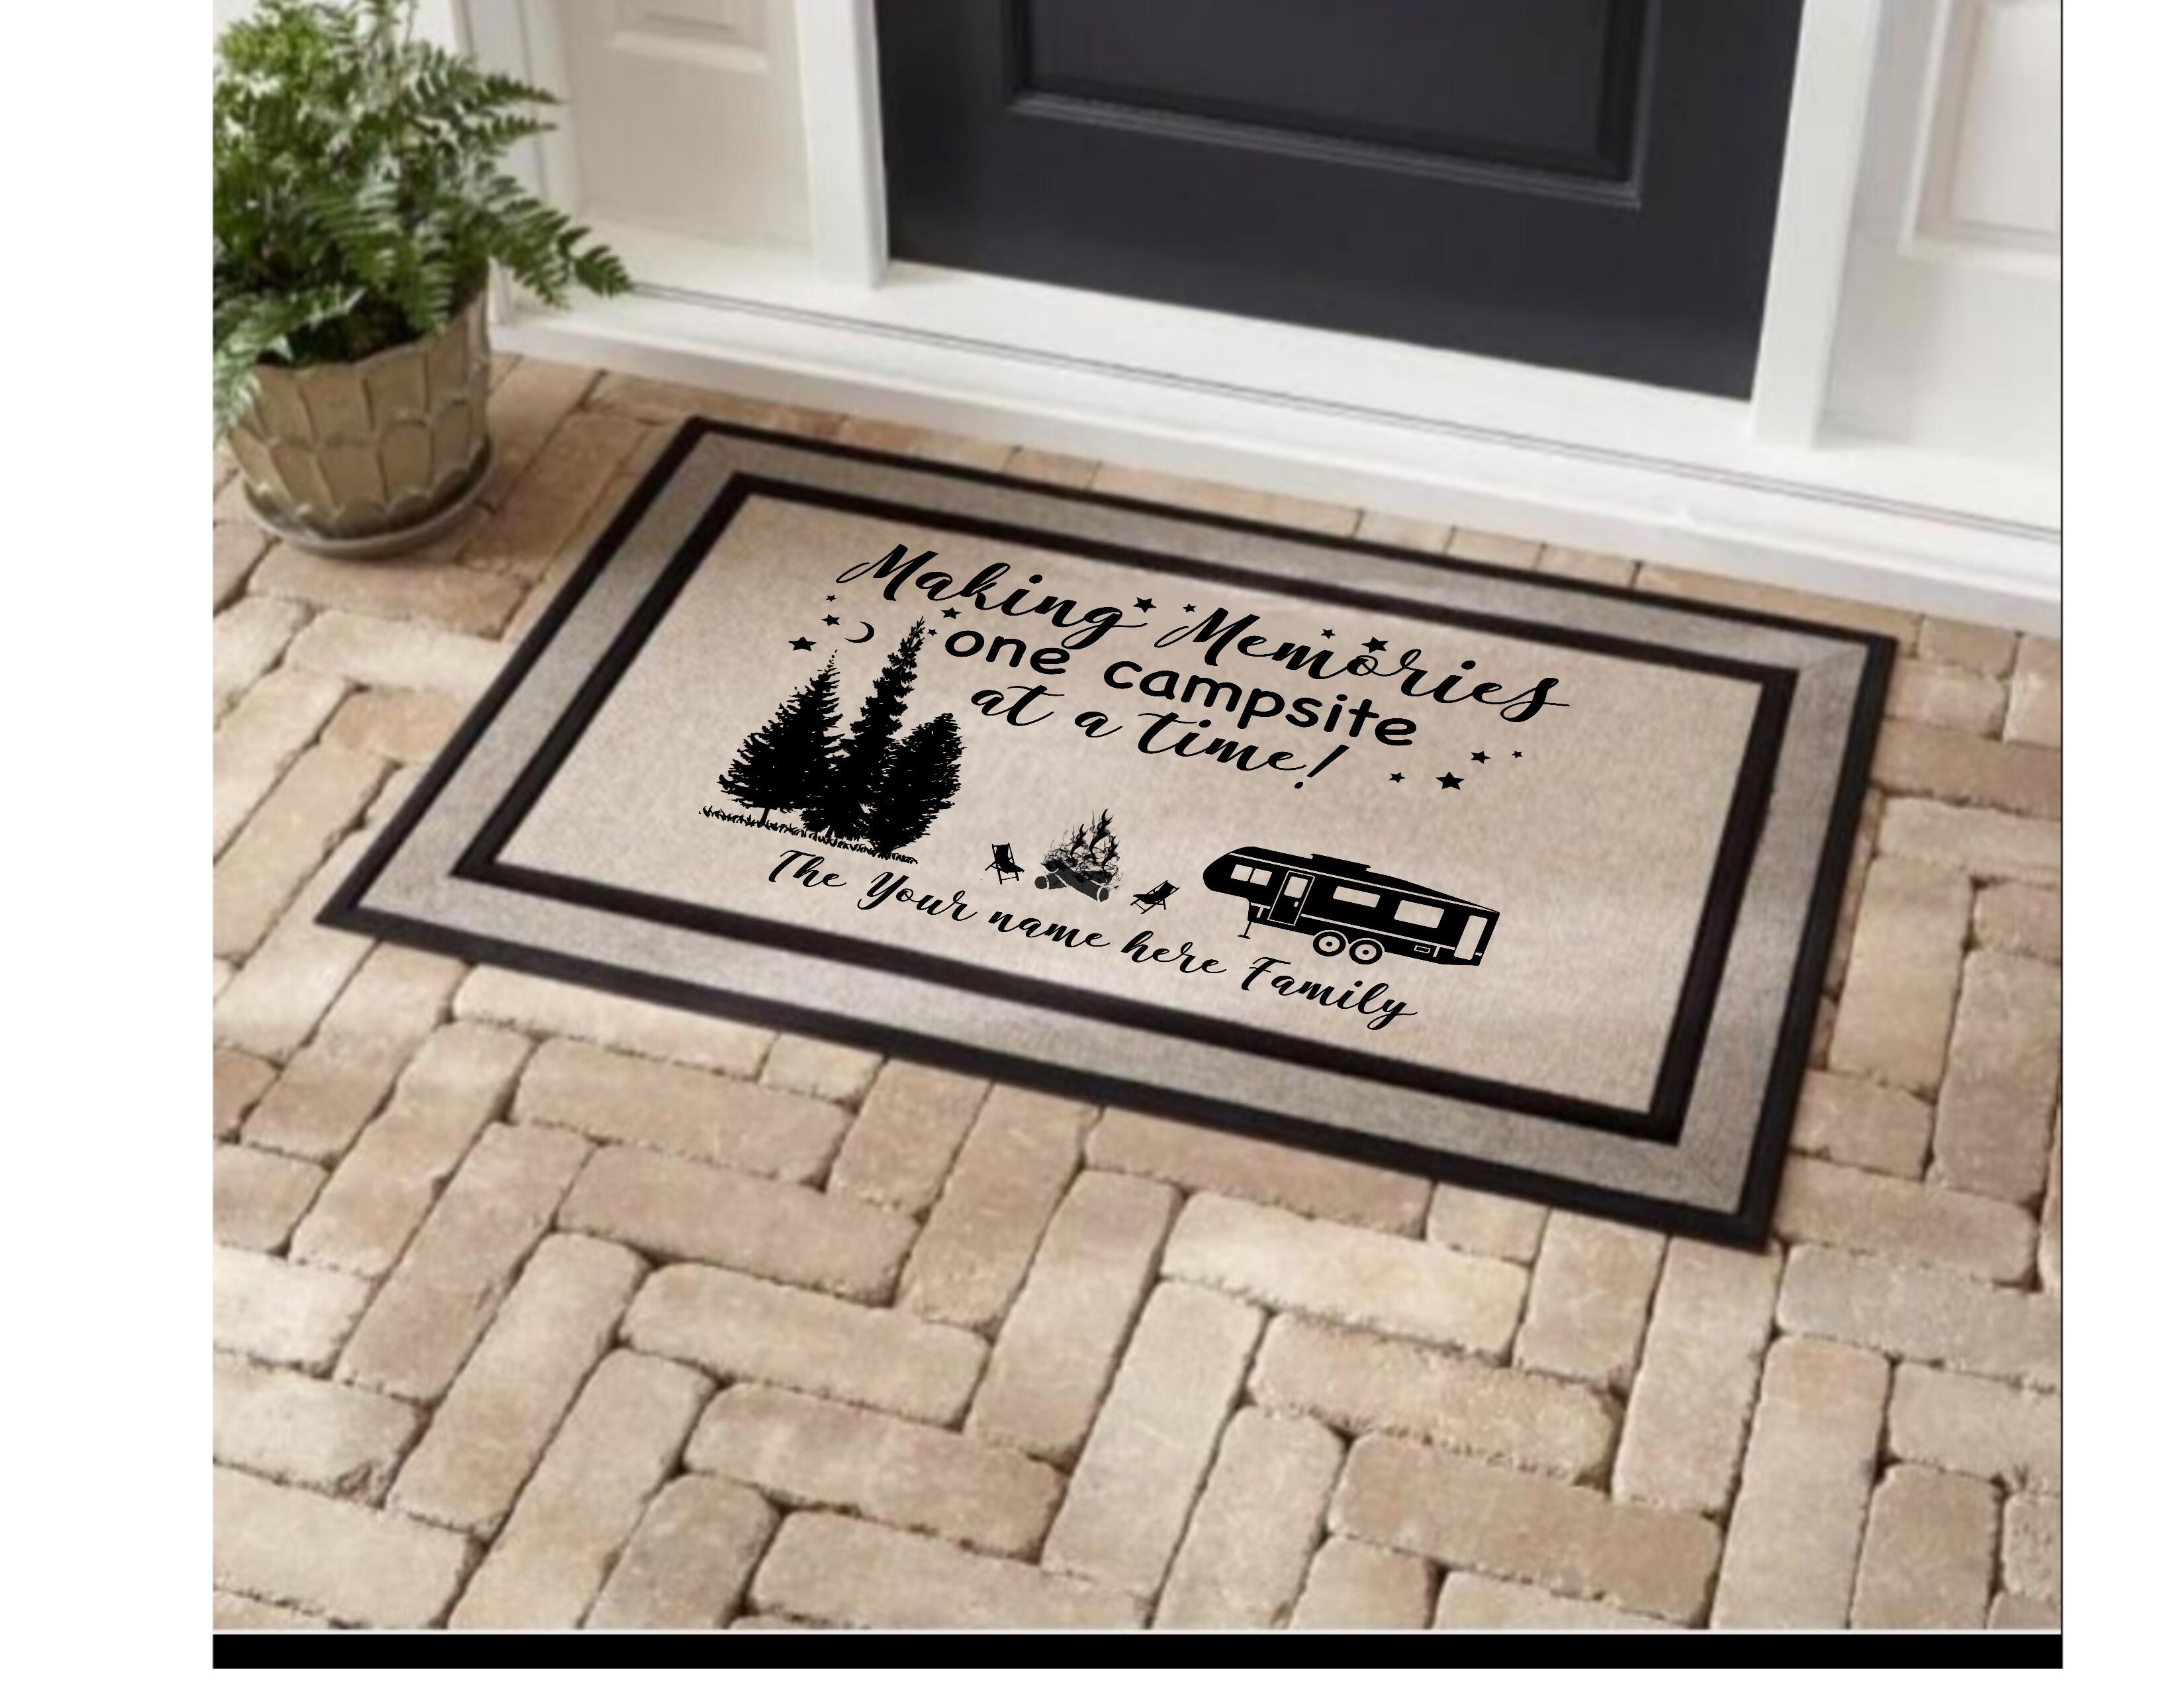 Fun & Games :: Sports & Outdoor :: Camping & Hiking :: Personalized doormat  for RV, Motorhome, trailer or camper, gift for someone who has everything